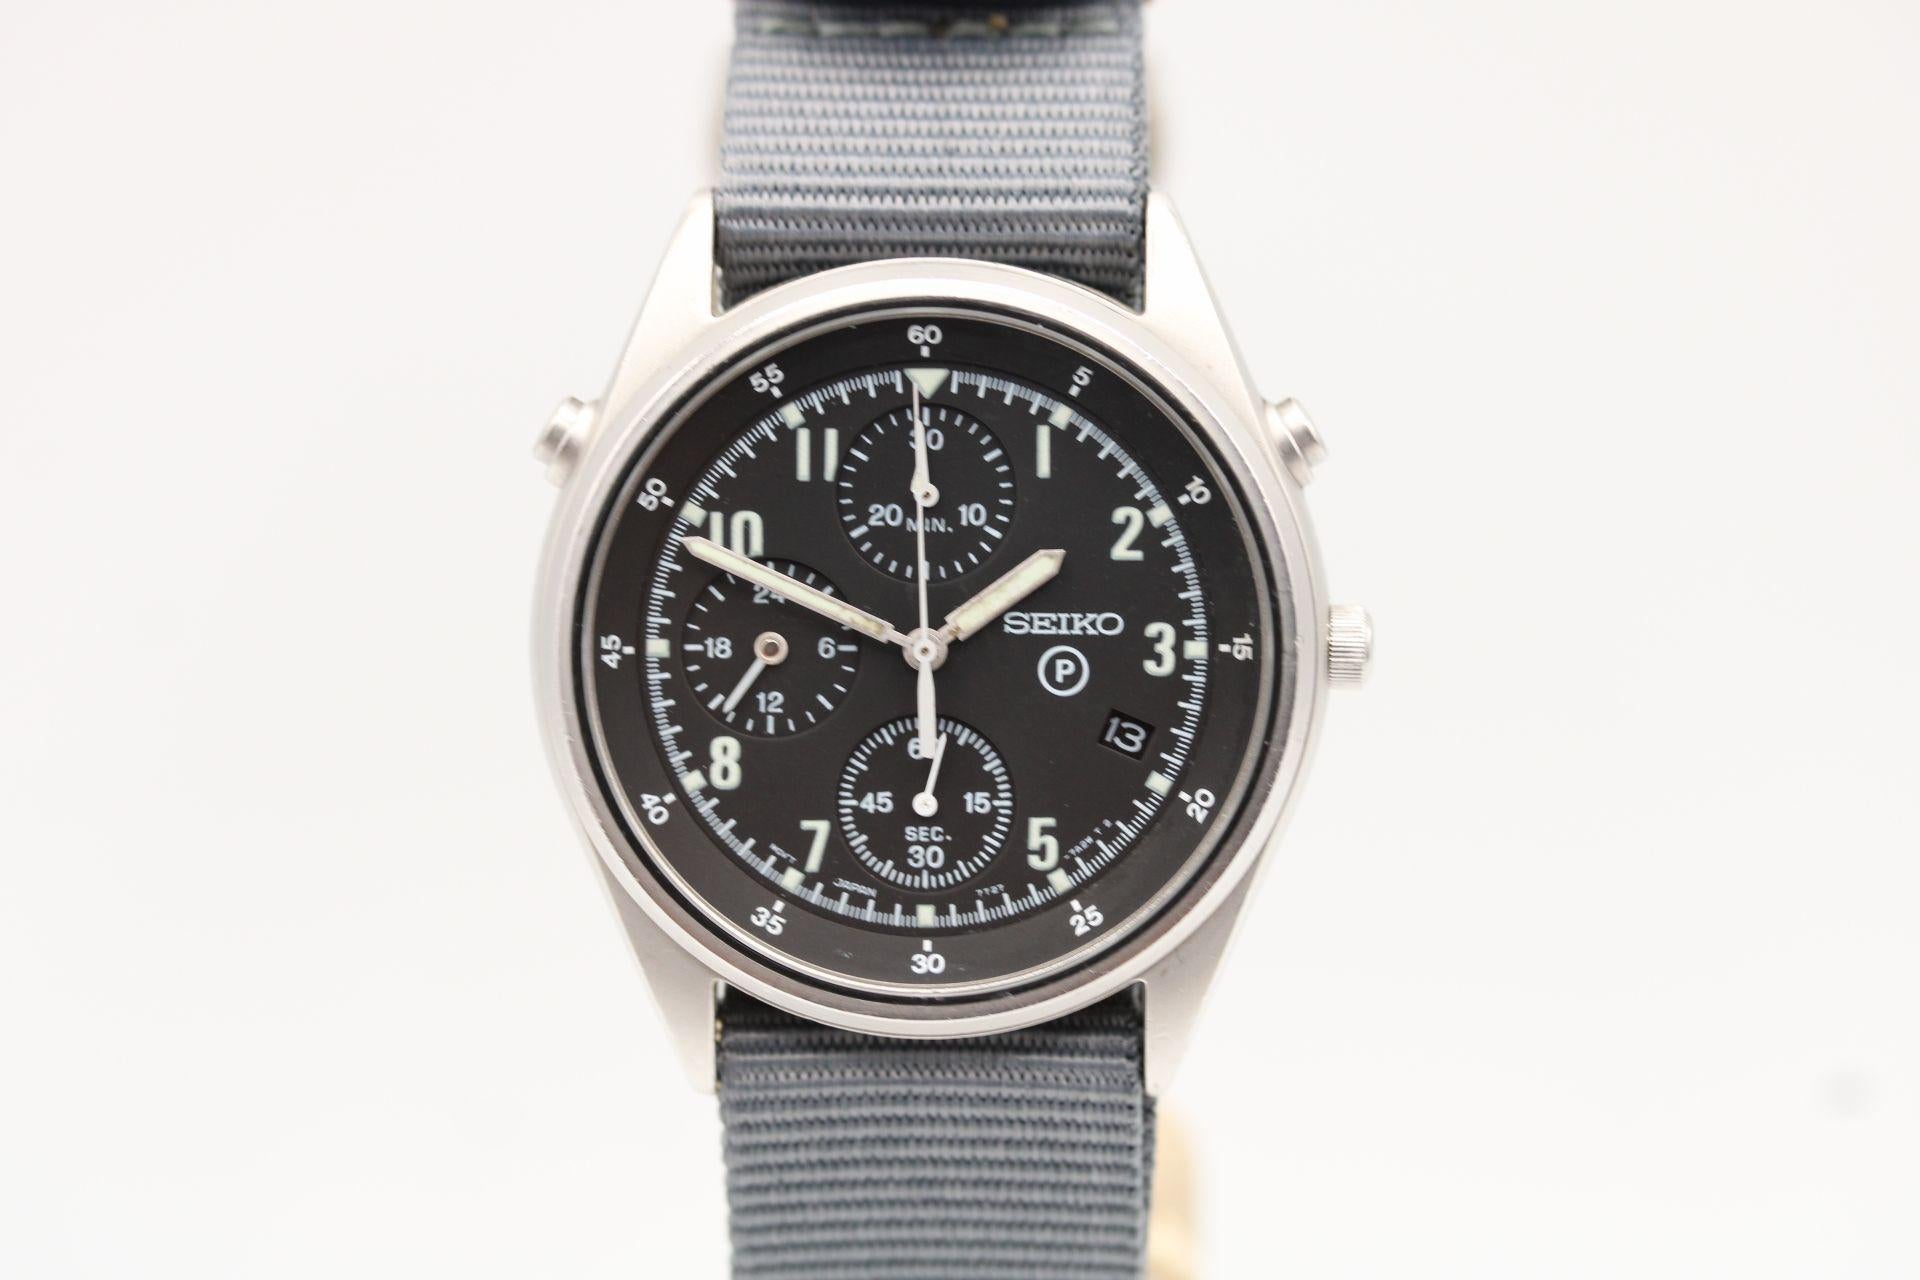 Watch: Seiko Generation 1 7A28-7120 c.1990 Watch Only
Stock Number: CHW5376
Price: £995.00

Original, working Generation 1 Seiko Chronograph made for the British RAF in 1984. Having been used in service as a tool watch will show some signs of age